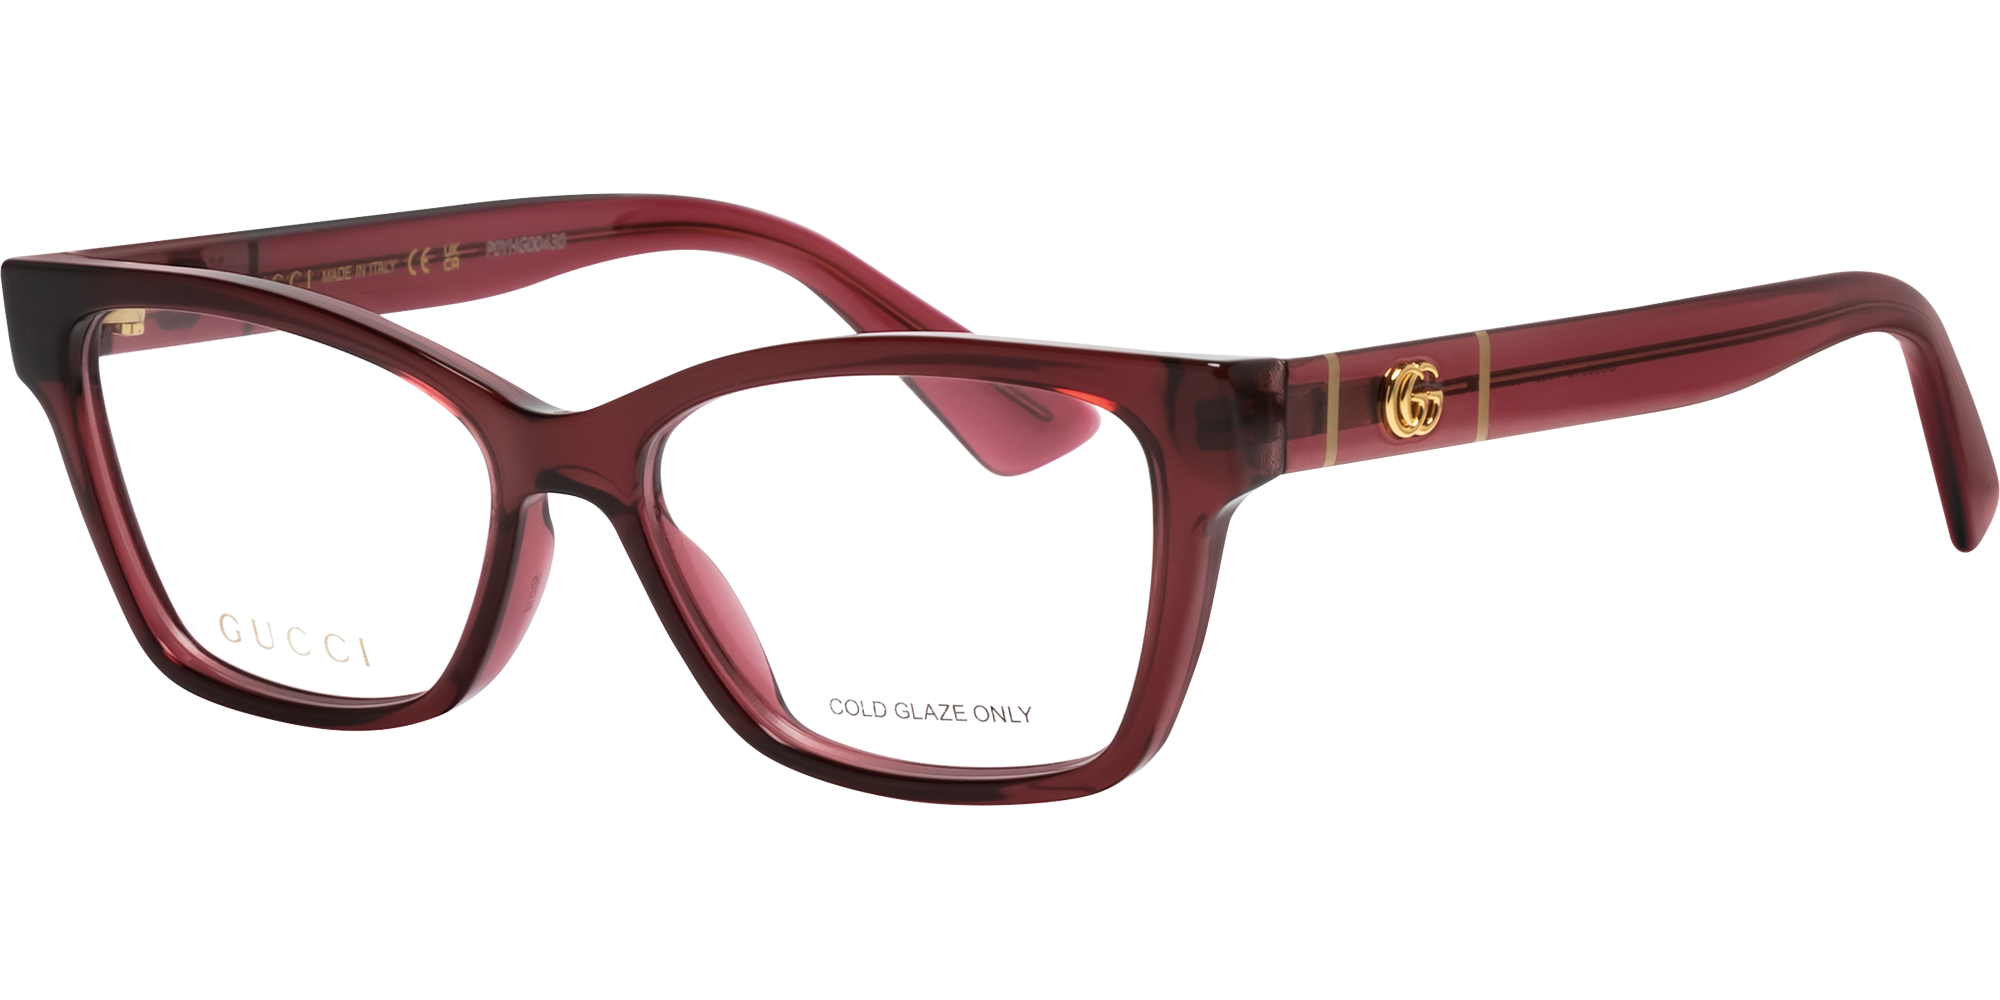 Gucci GG0634O image number null